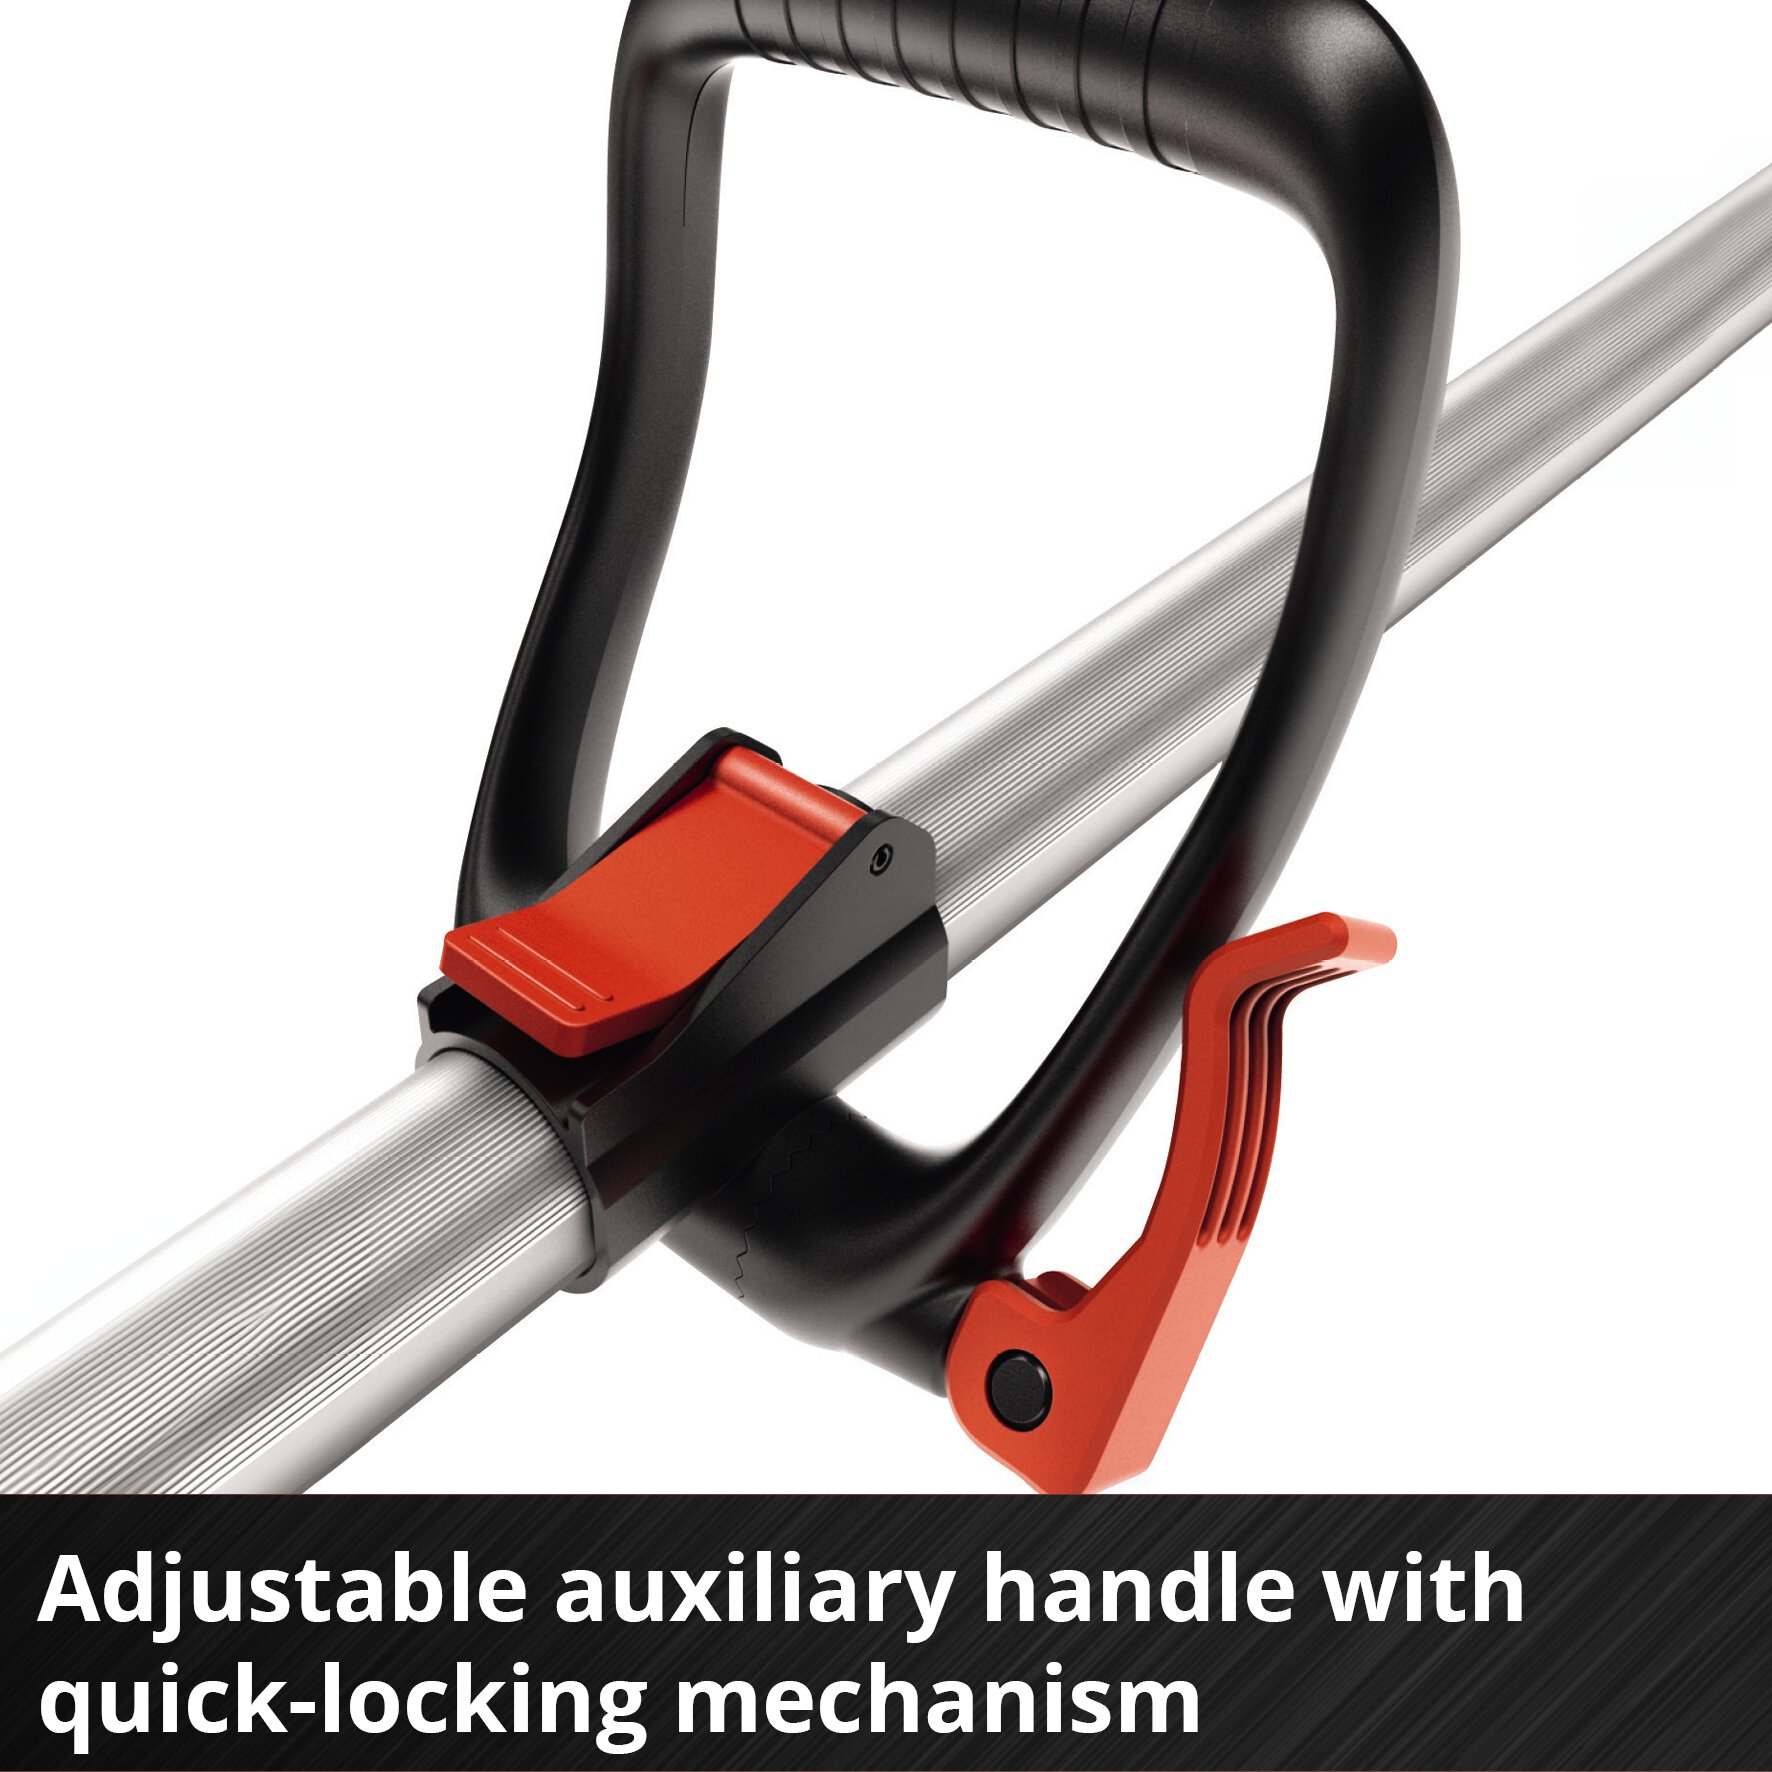 einhell-expert-cl-telescopic-hedge-trimmer-3410866-detail_image-005